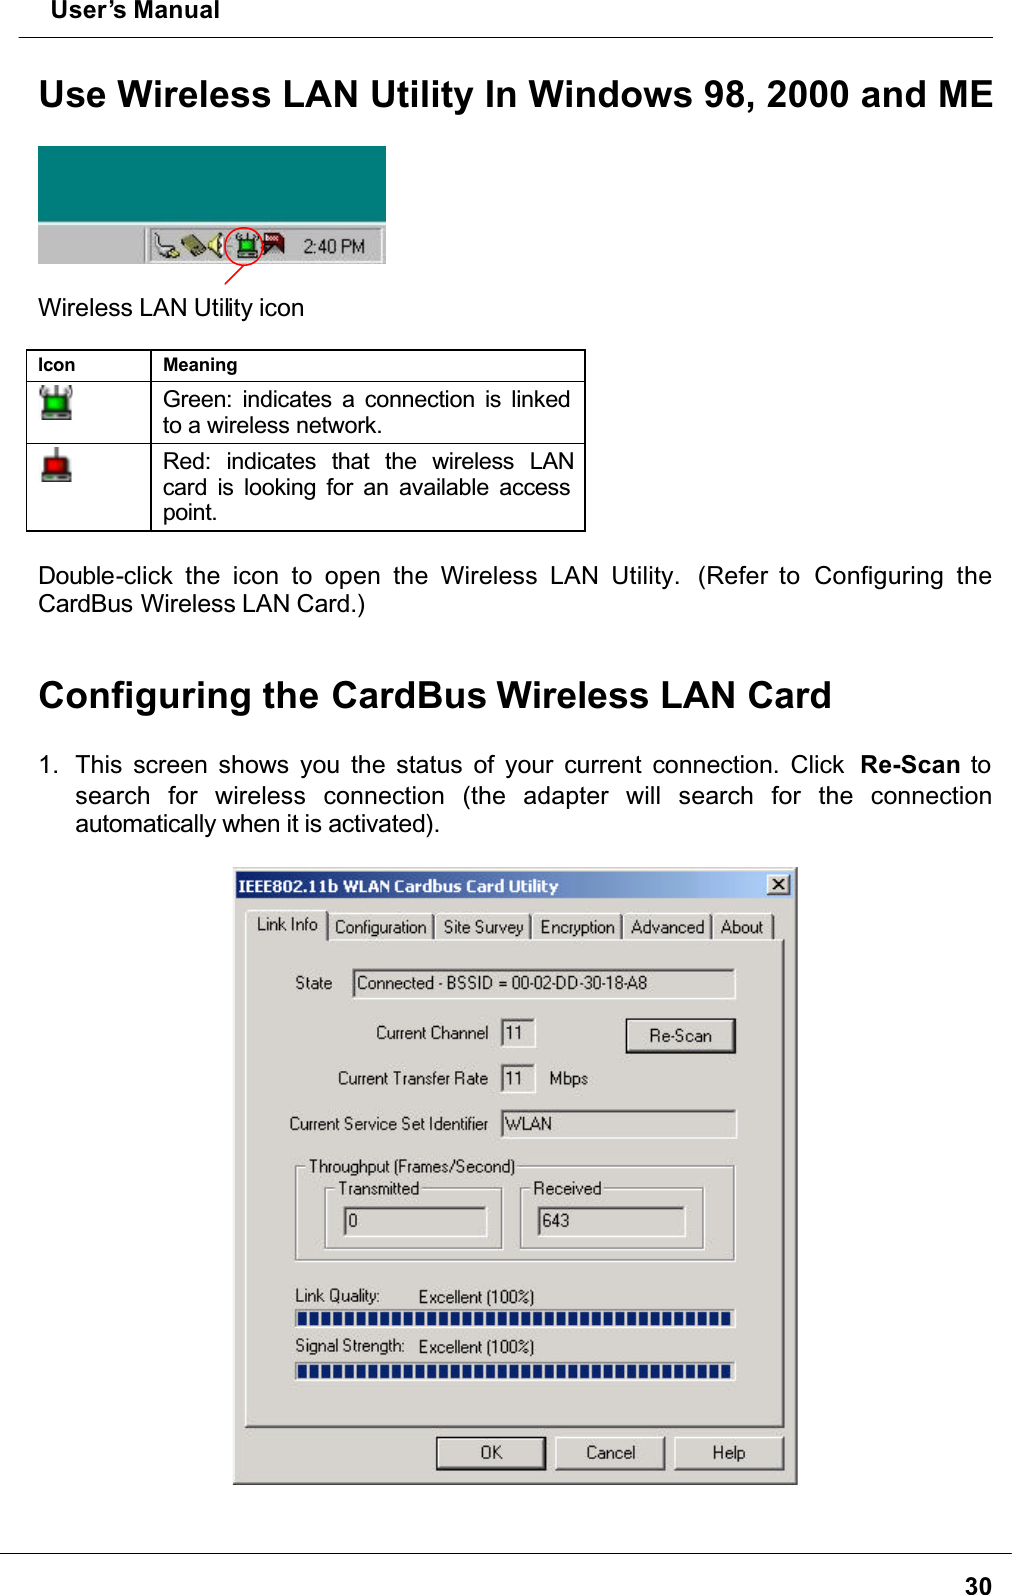  User’s Manual30Use Wireless LAN Utility In Windows 98, 2000 and MEWireless LAN Utility iconIcon MeaningGreen: indicates a connection is linked to a wireless network.Red: indicates that the wireless LANcard is looking for an available access point.Double-click the icon to open the Wireless LAN Utility.  (Refer to Configuring theCardBus Wireless LAN Card.)Configuring the CardBus Wireless LAN Card 1. This screen shows you the status of your current connection. Click  Re-Scan to search for wireless connection (the adapter will search for the connectionautomatically when it is activated).